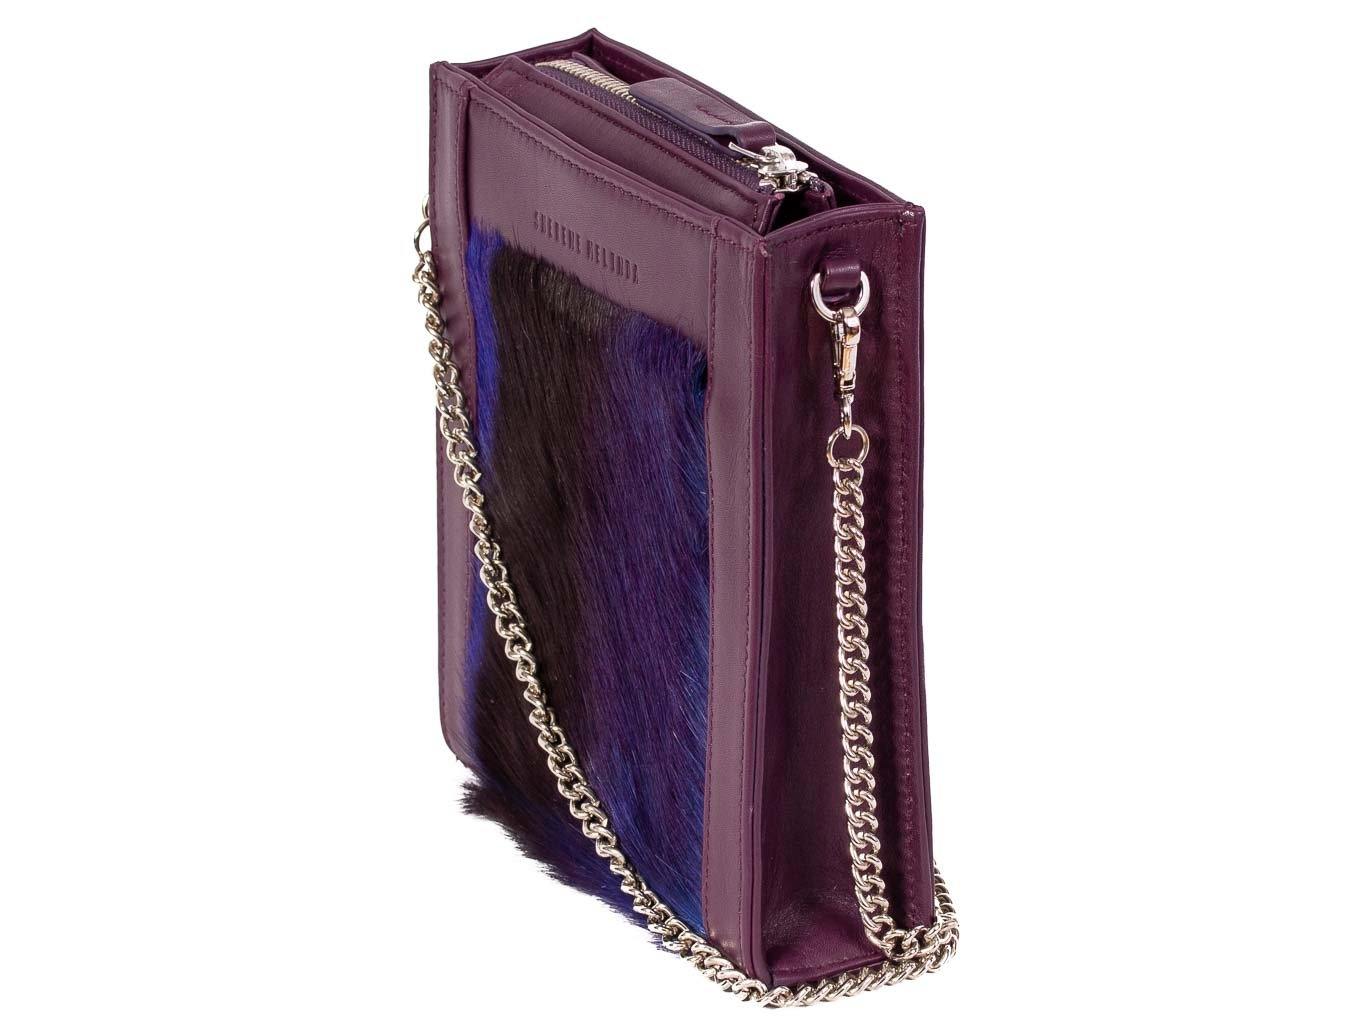 Messenger Springbok Handbag in Deep Purple with a stripe feature by Sherene Melinda front strap